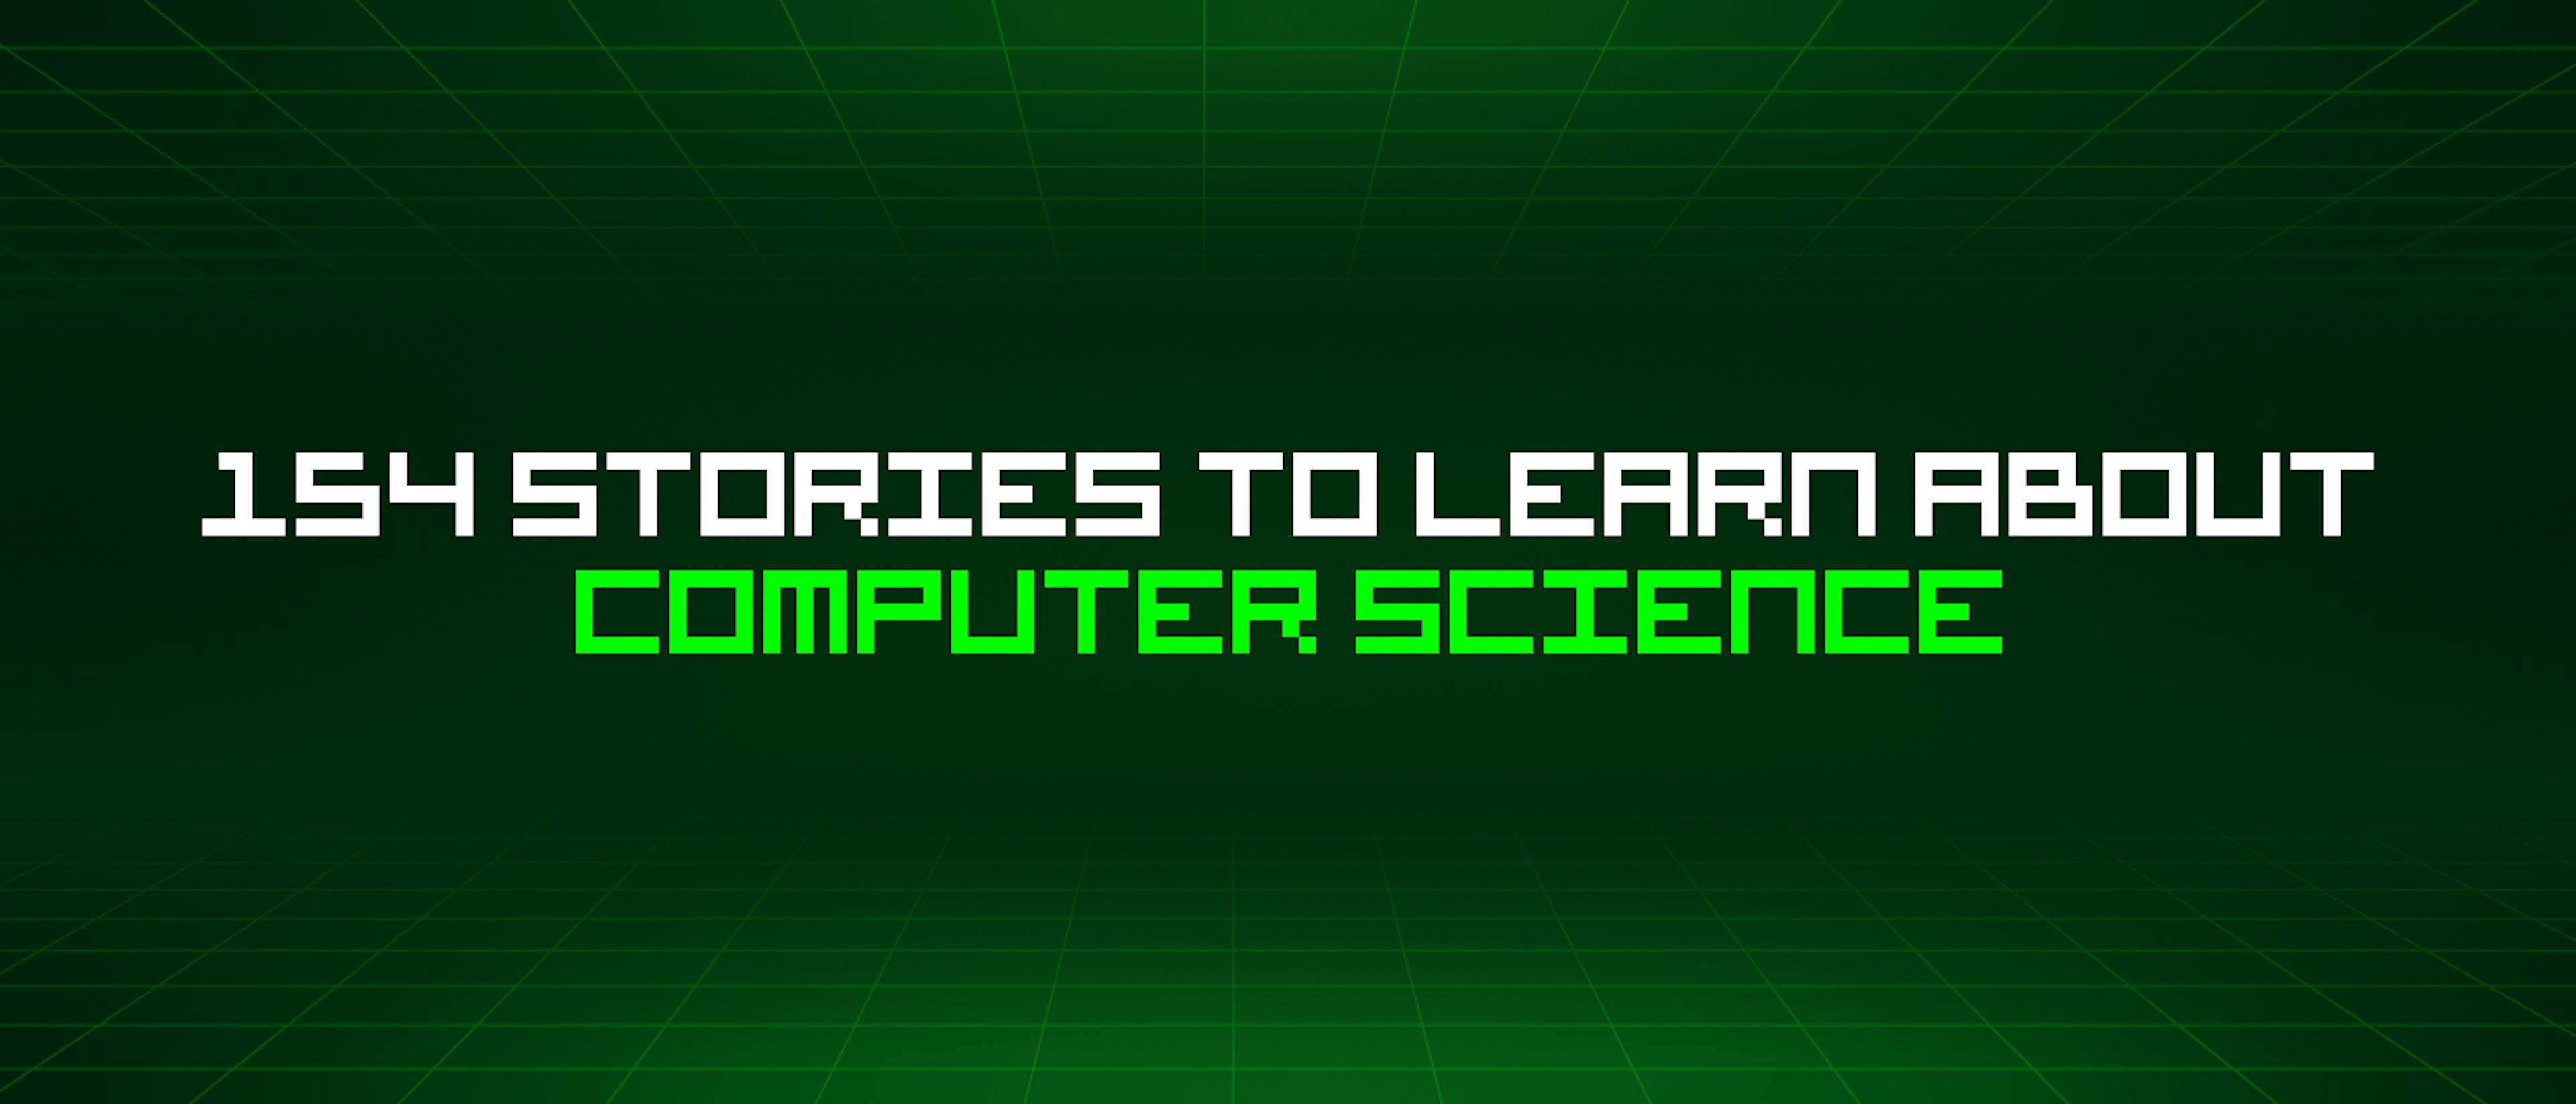 featured image - 154 Stories To Learn About Computer Science